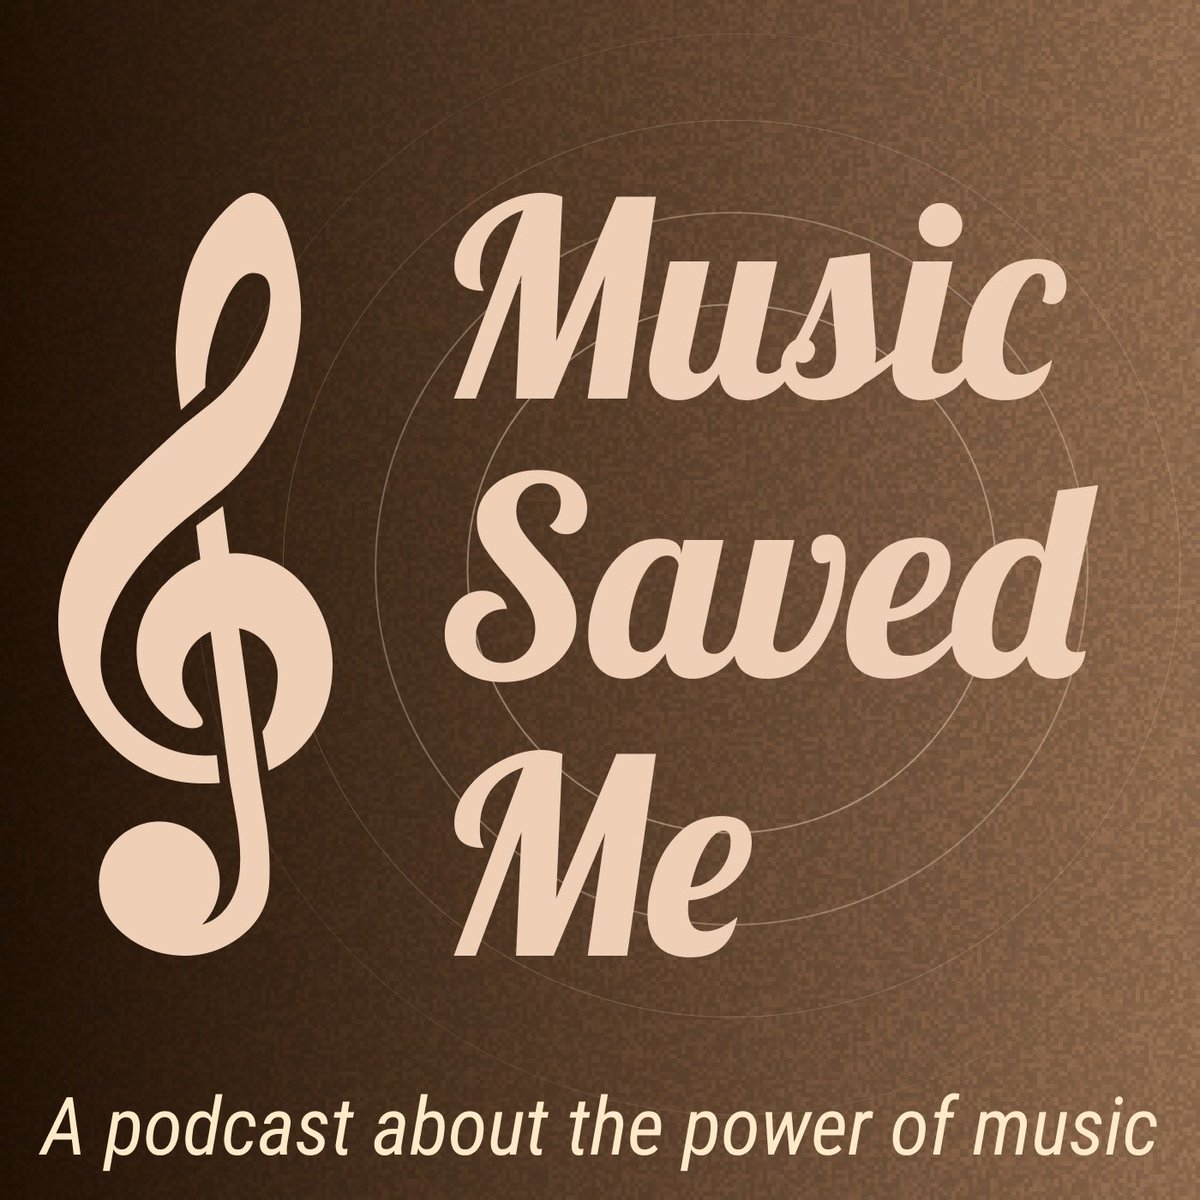 New Episode of our Music Saved Me podcast with @rickallenlive from @DefLeppard and @IamLaurenMonroe. 2 of the finest people you’ll ever meet doing amazing work with @ravendrum Listen here, Follow and Share. podcasts.apple.com/us/podcast/mus… @musiciansoncall #MentalHealthAwareness